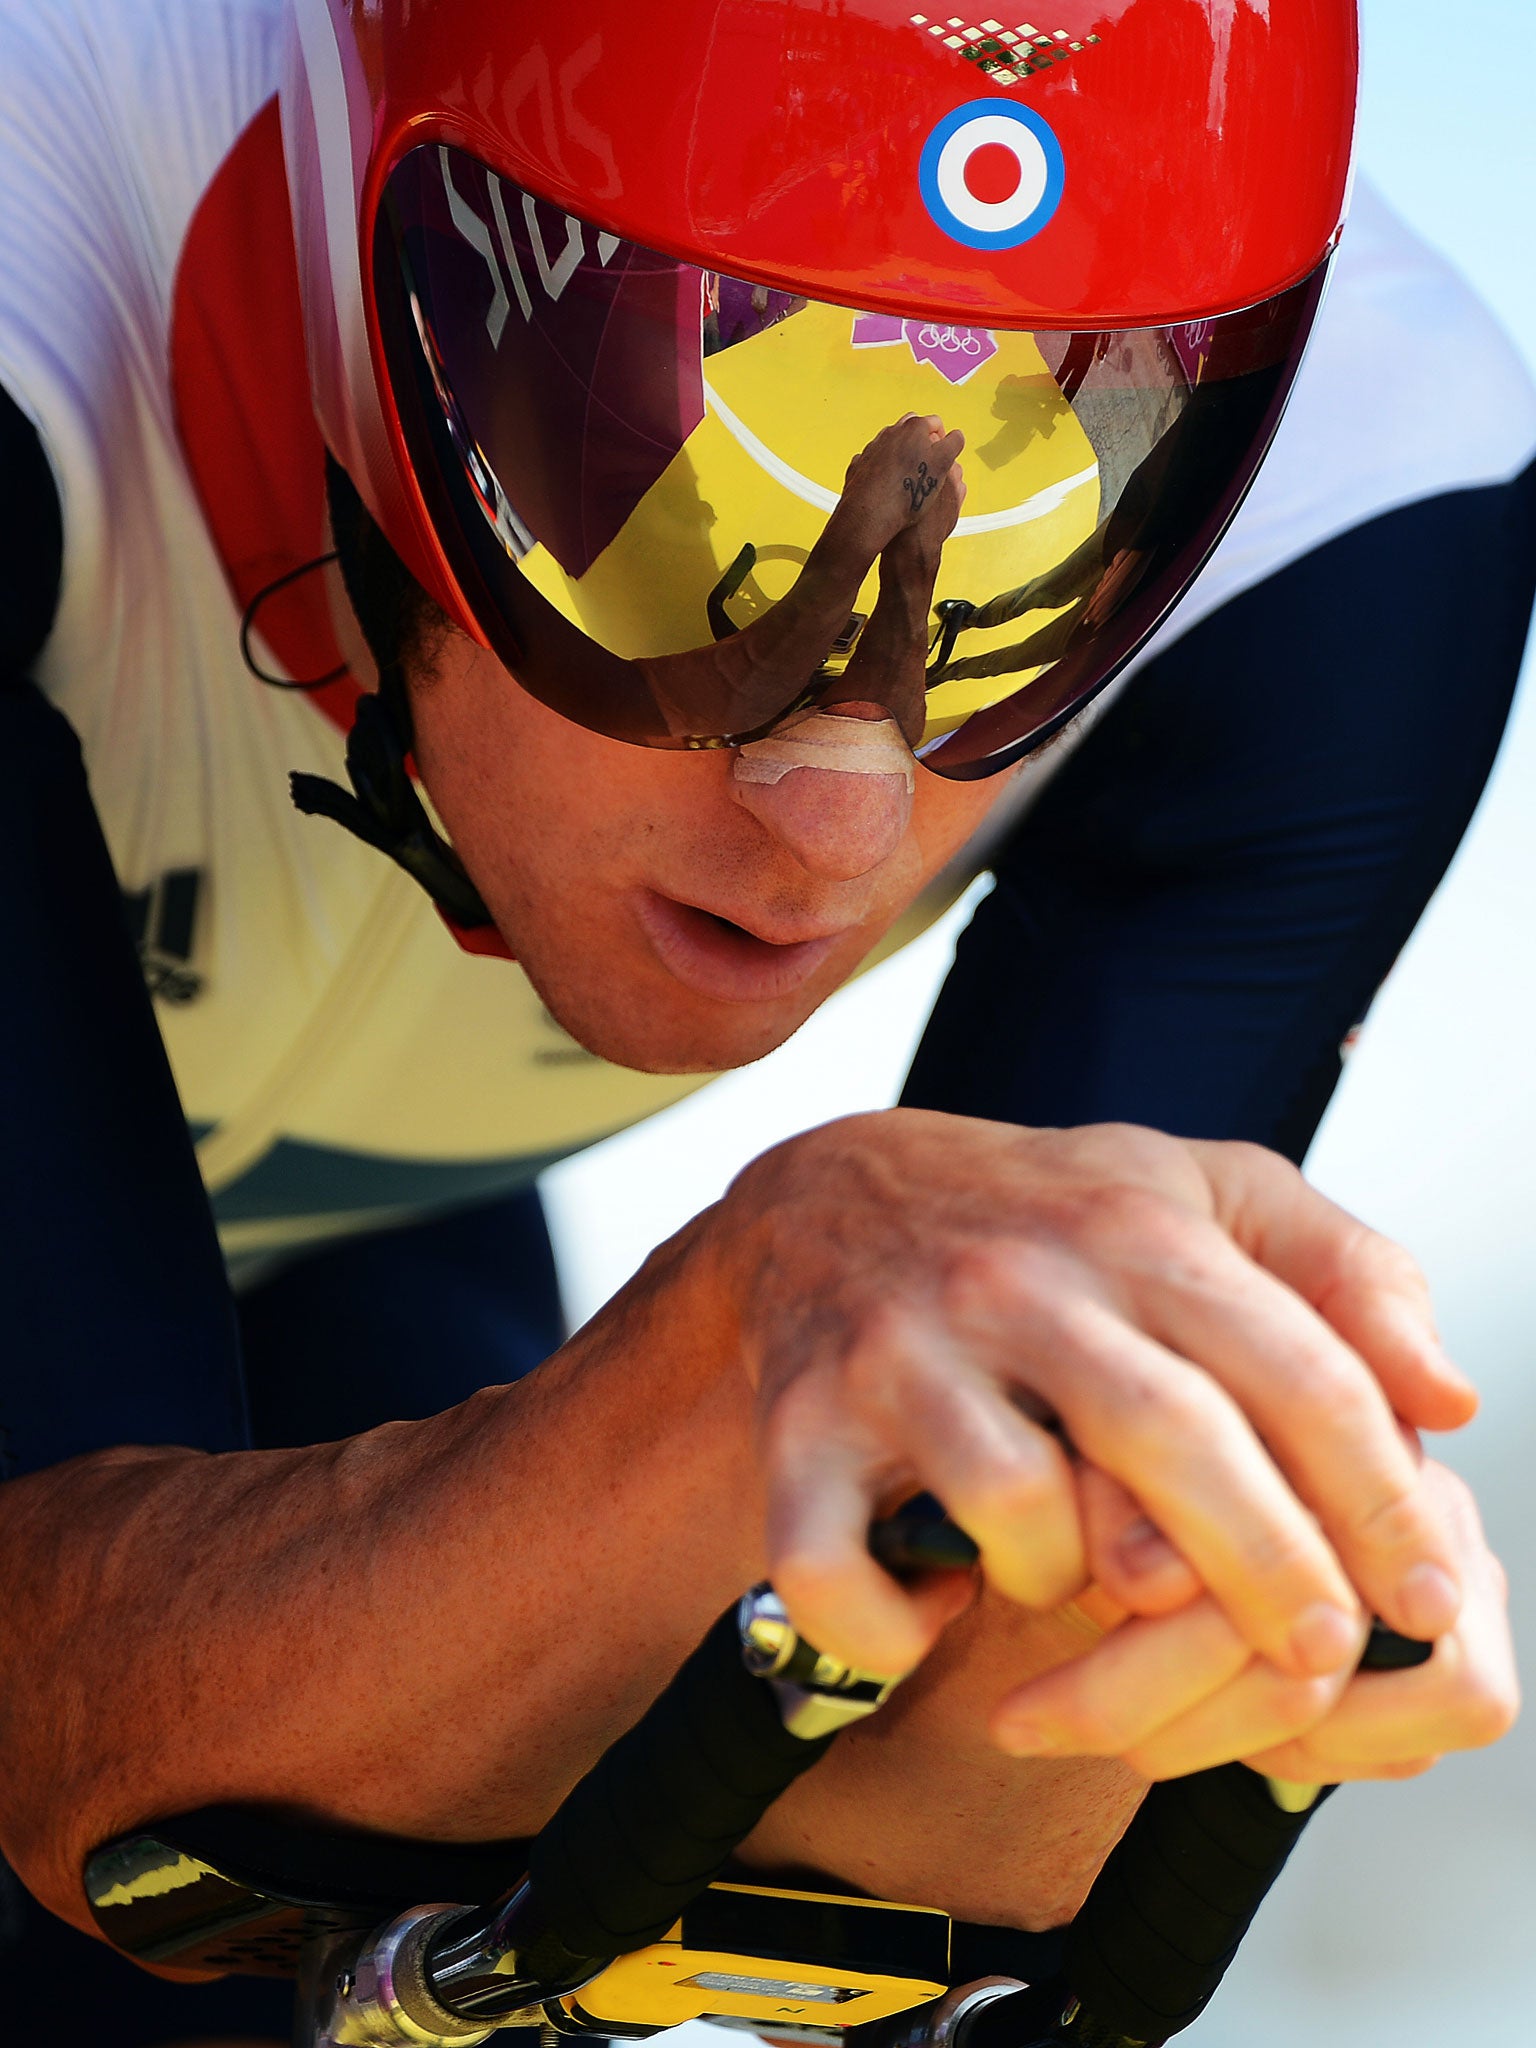 Cycling, the favoured pastime of Bradley Wiggins, pictured, has seen a decline of 3.5% since last summers Olympic Games